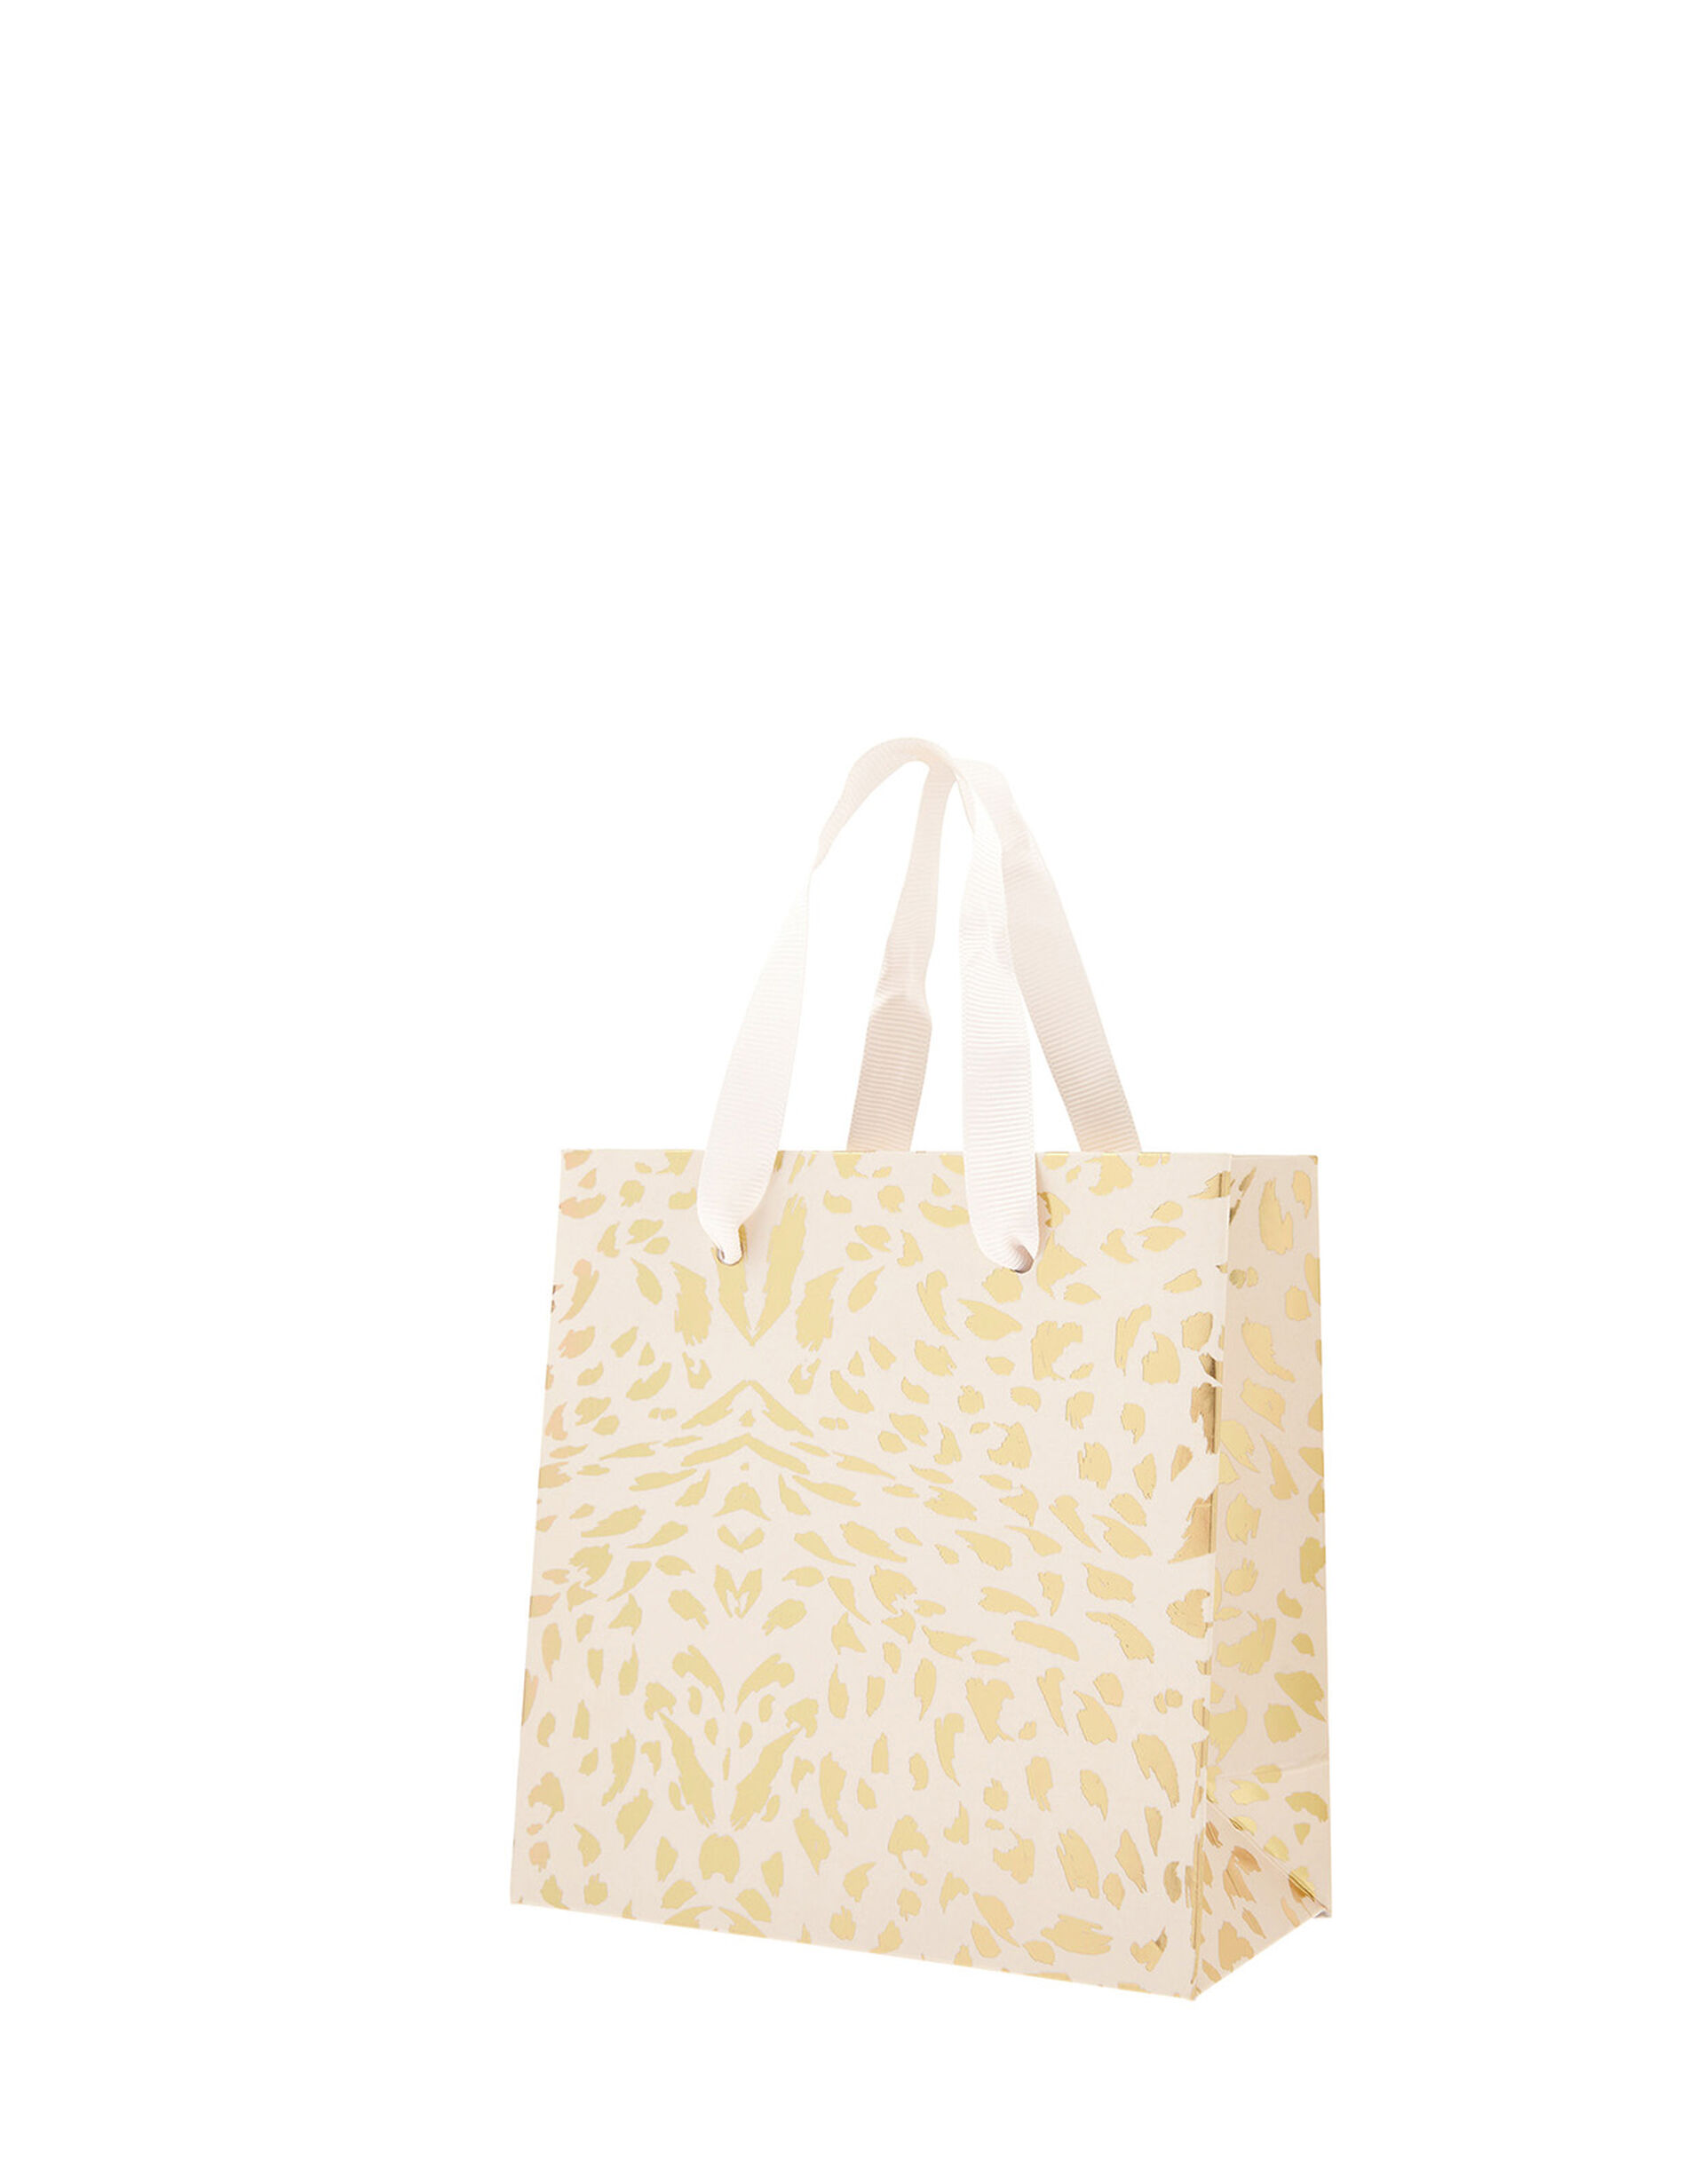 Small Gold Foil Print Gift Bag, , large